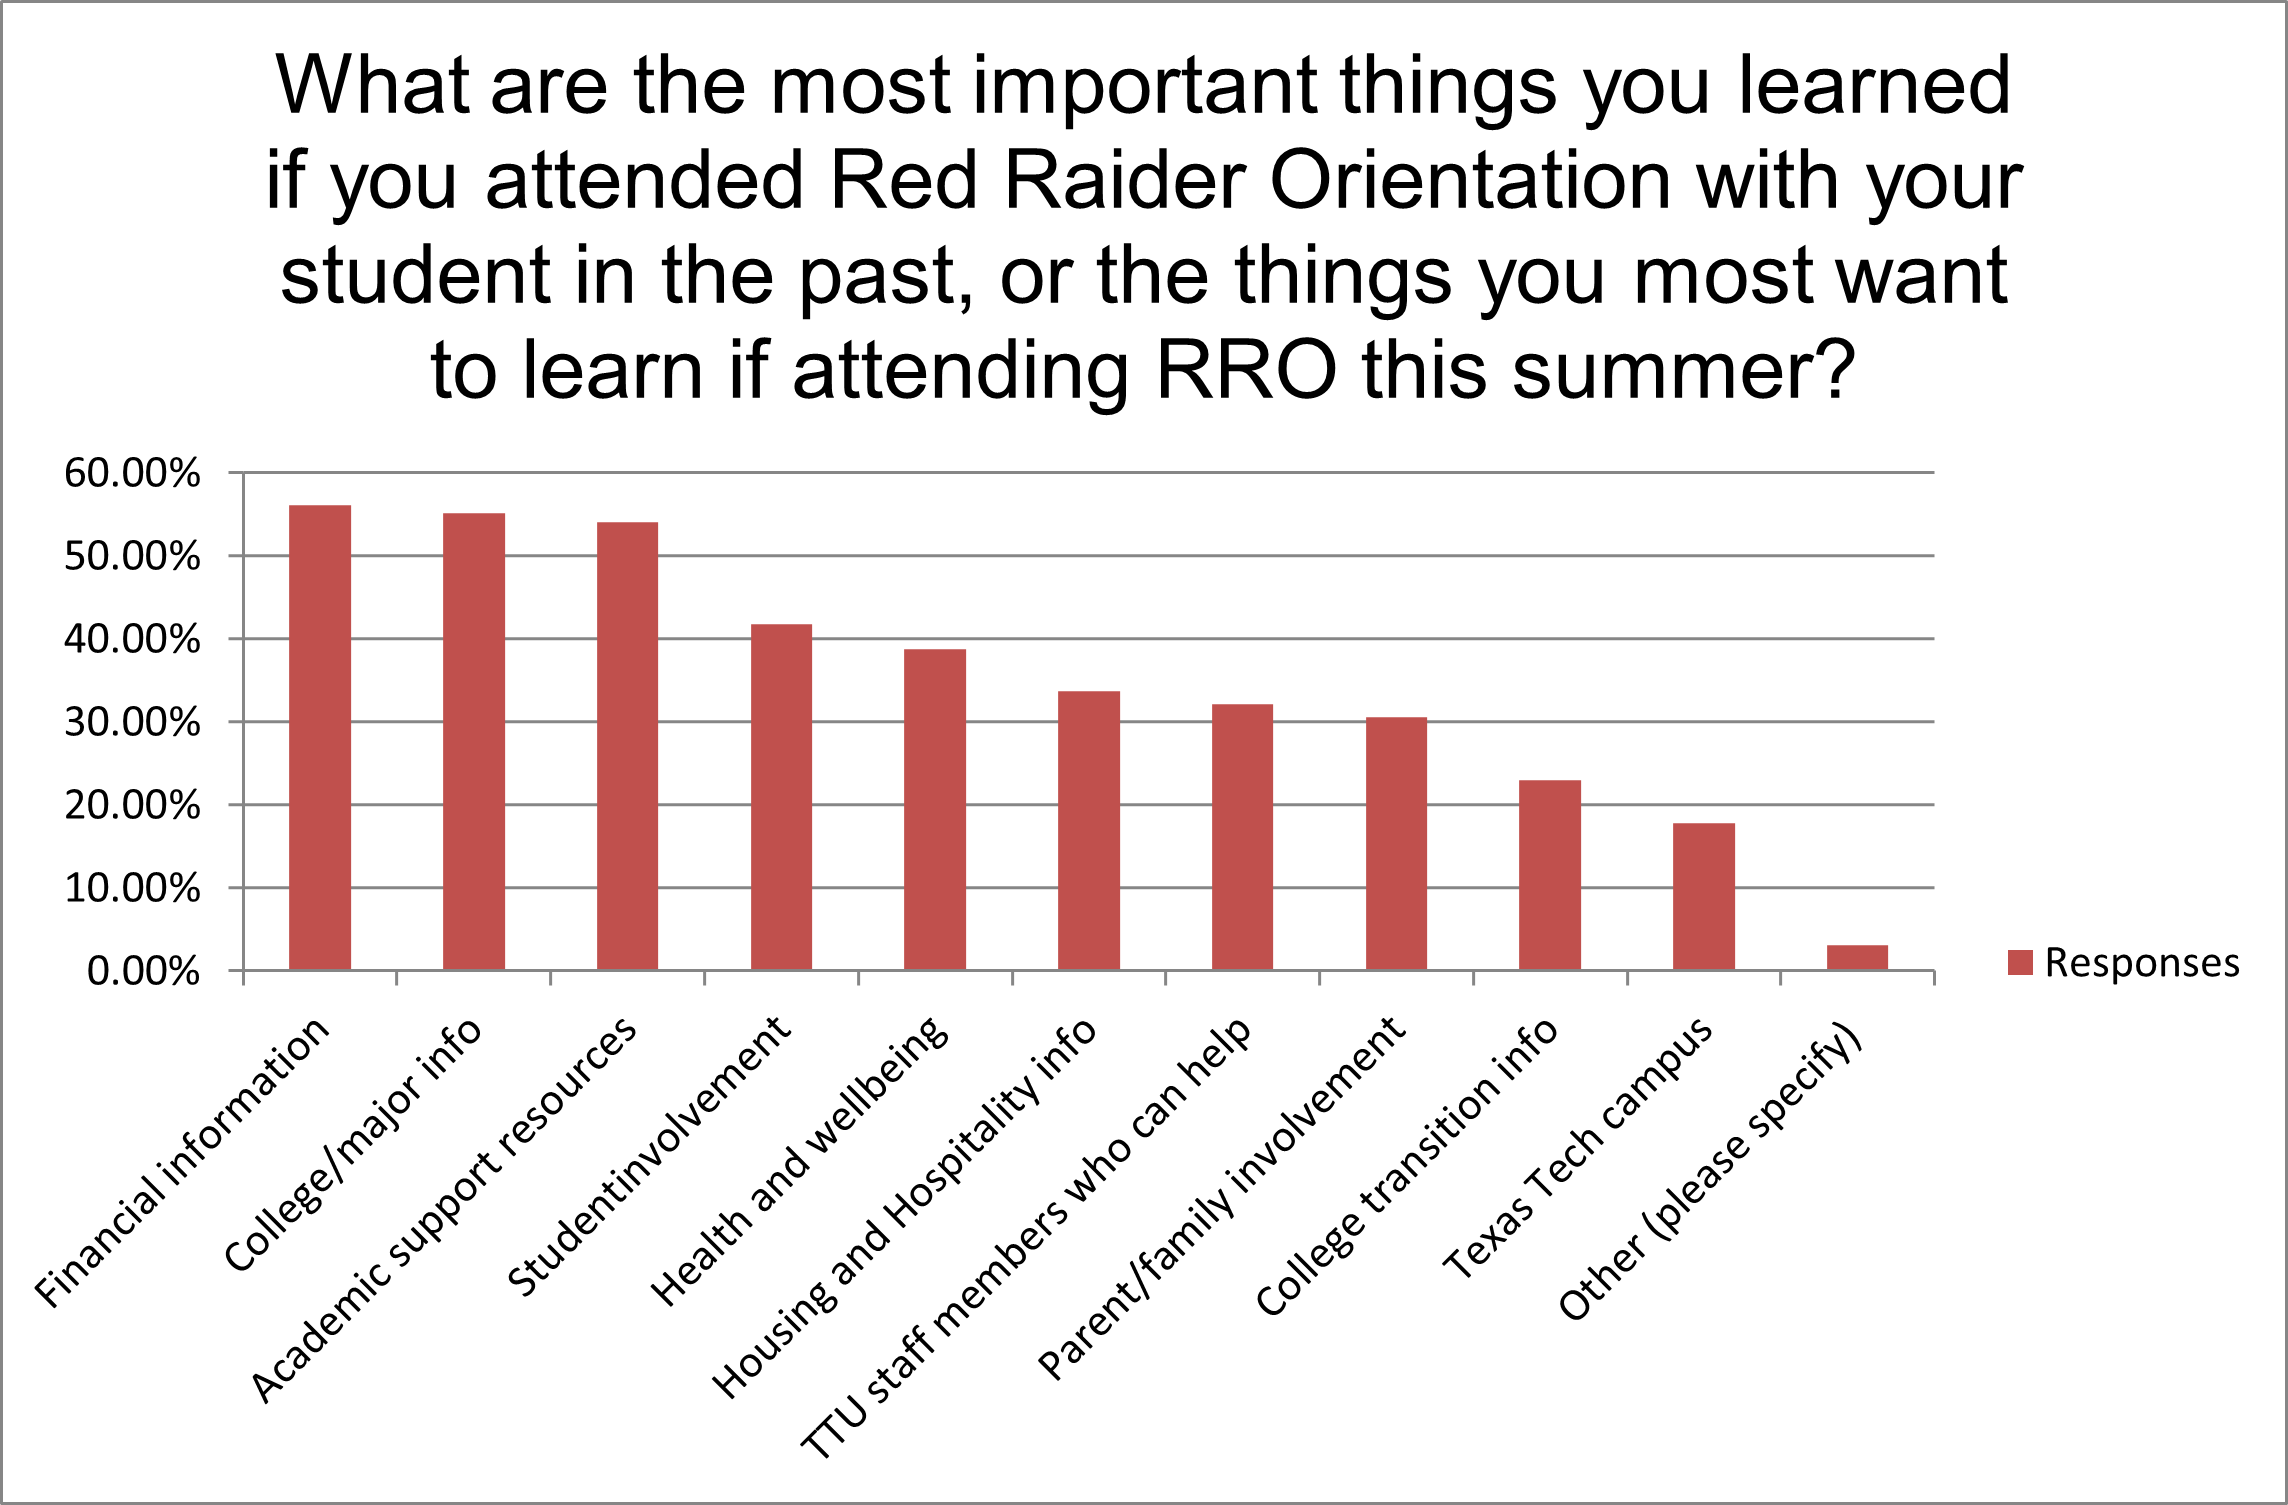 Chart showing poll results of question "What are the most important things you learned if you attended Red Raider Orientation with your student in the past, or the things you most want to learn if attending RRO this summer?"  Top three answers were financial information, college/major specific information, and academic support resources